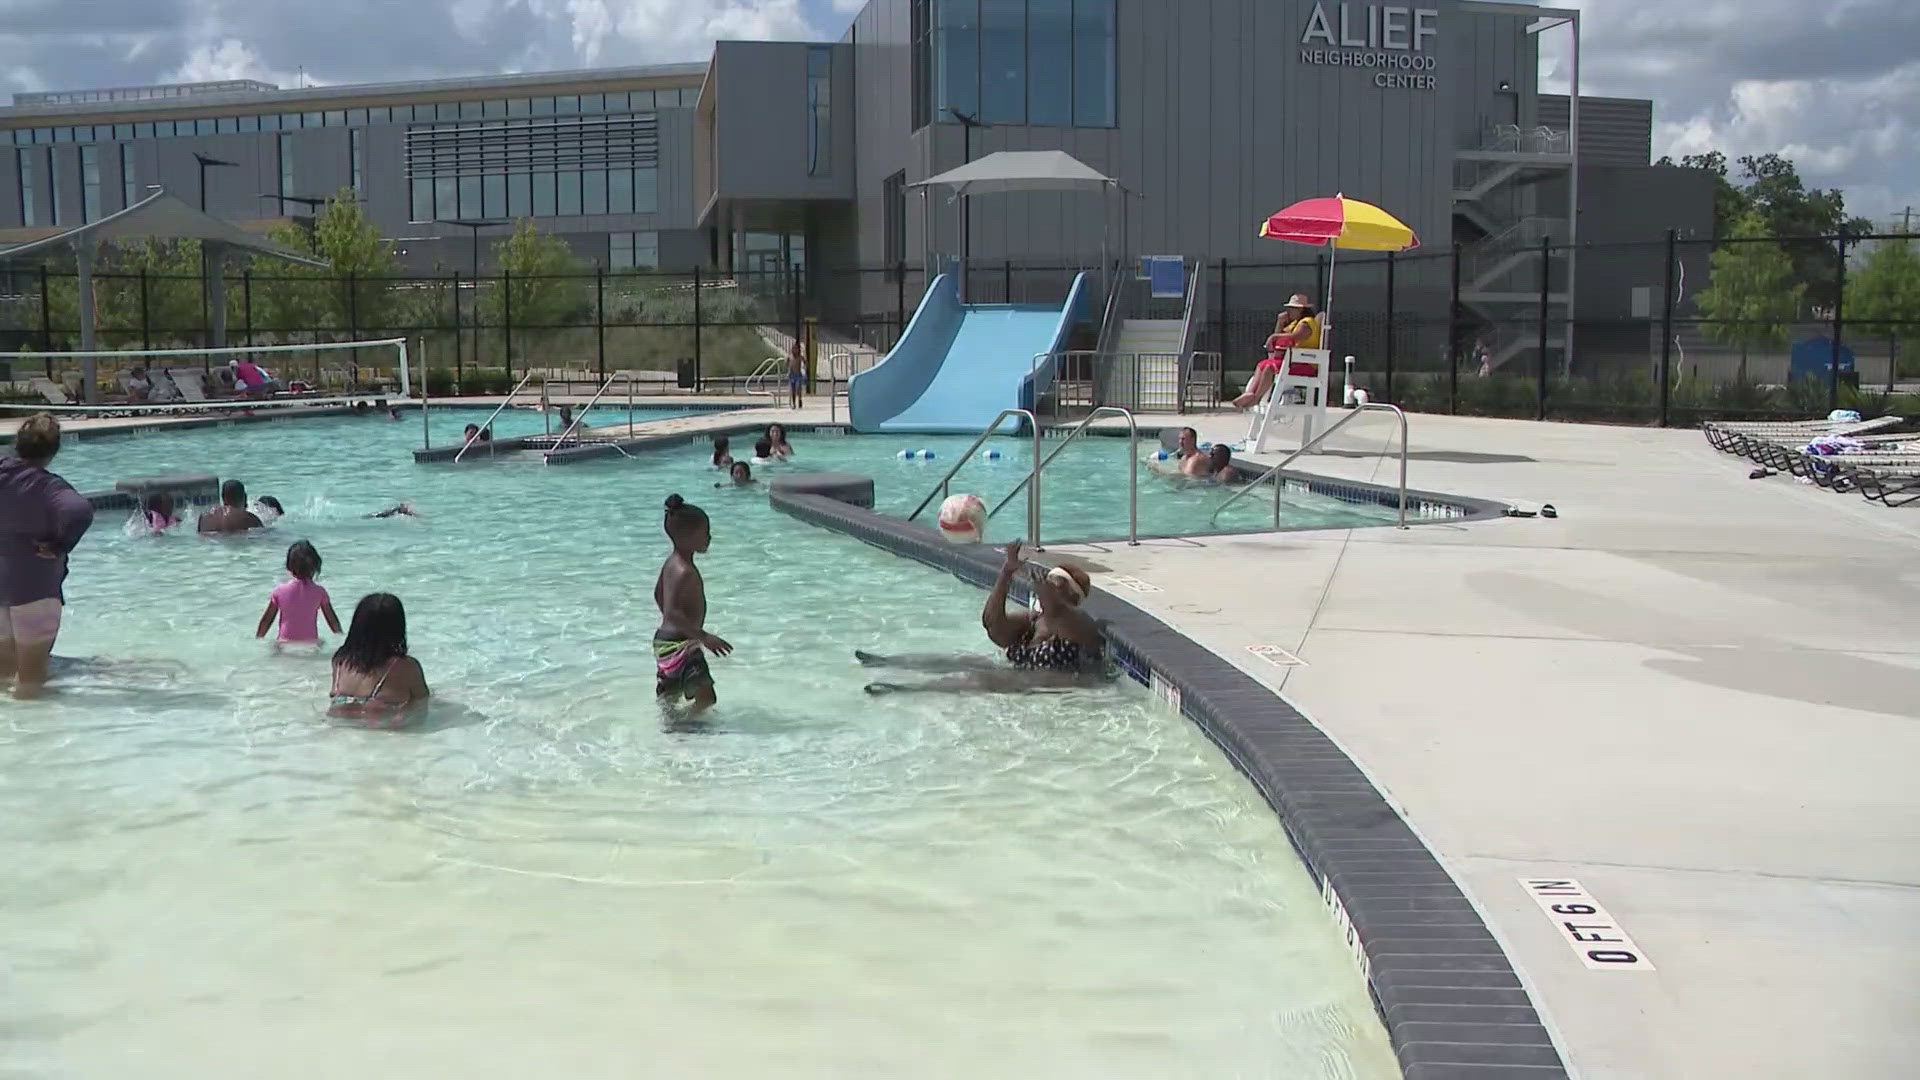 The Parks and Recreation Department is offering $500 bonuses and lifeguards earn $16 an hour.